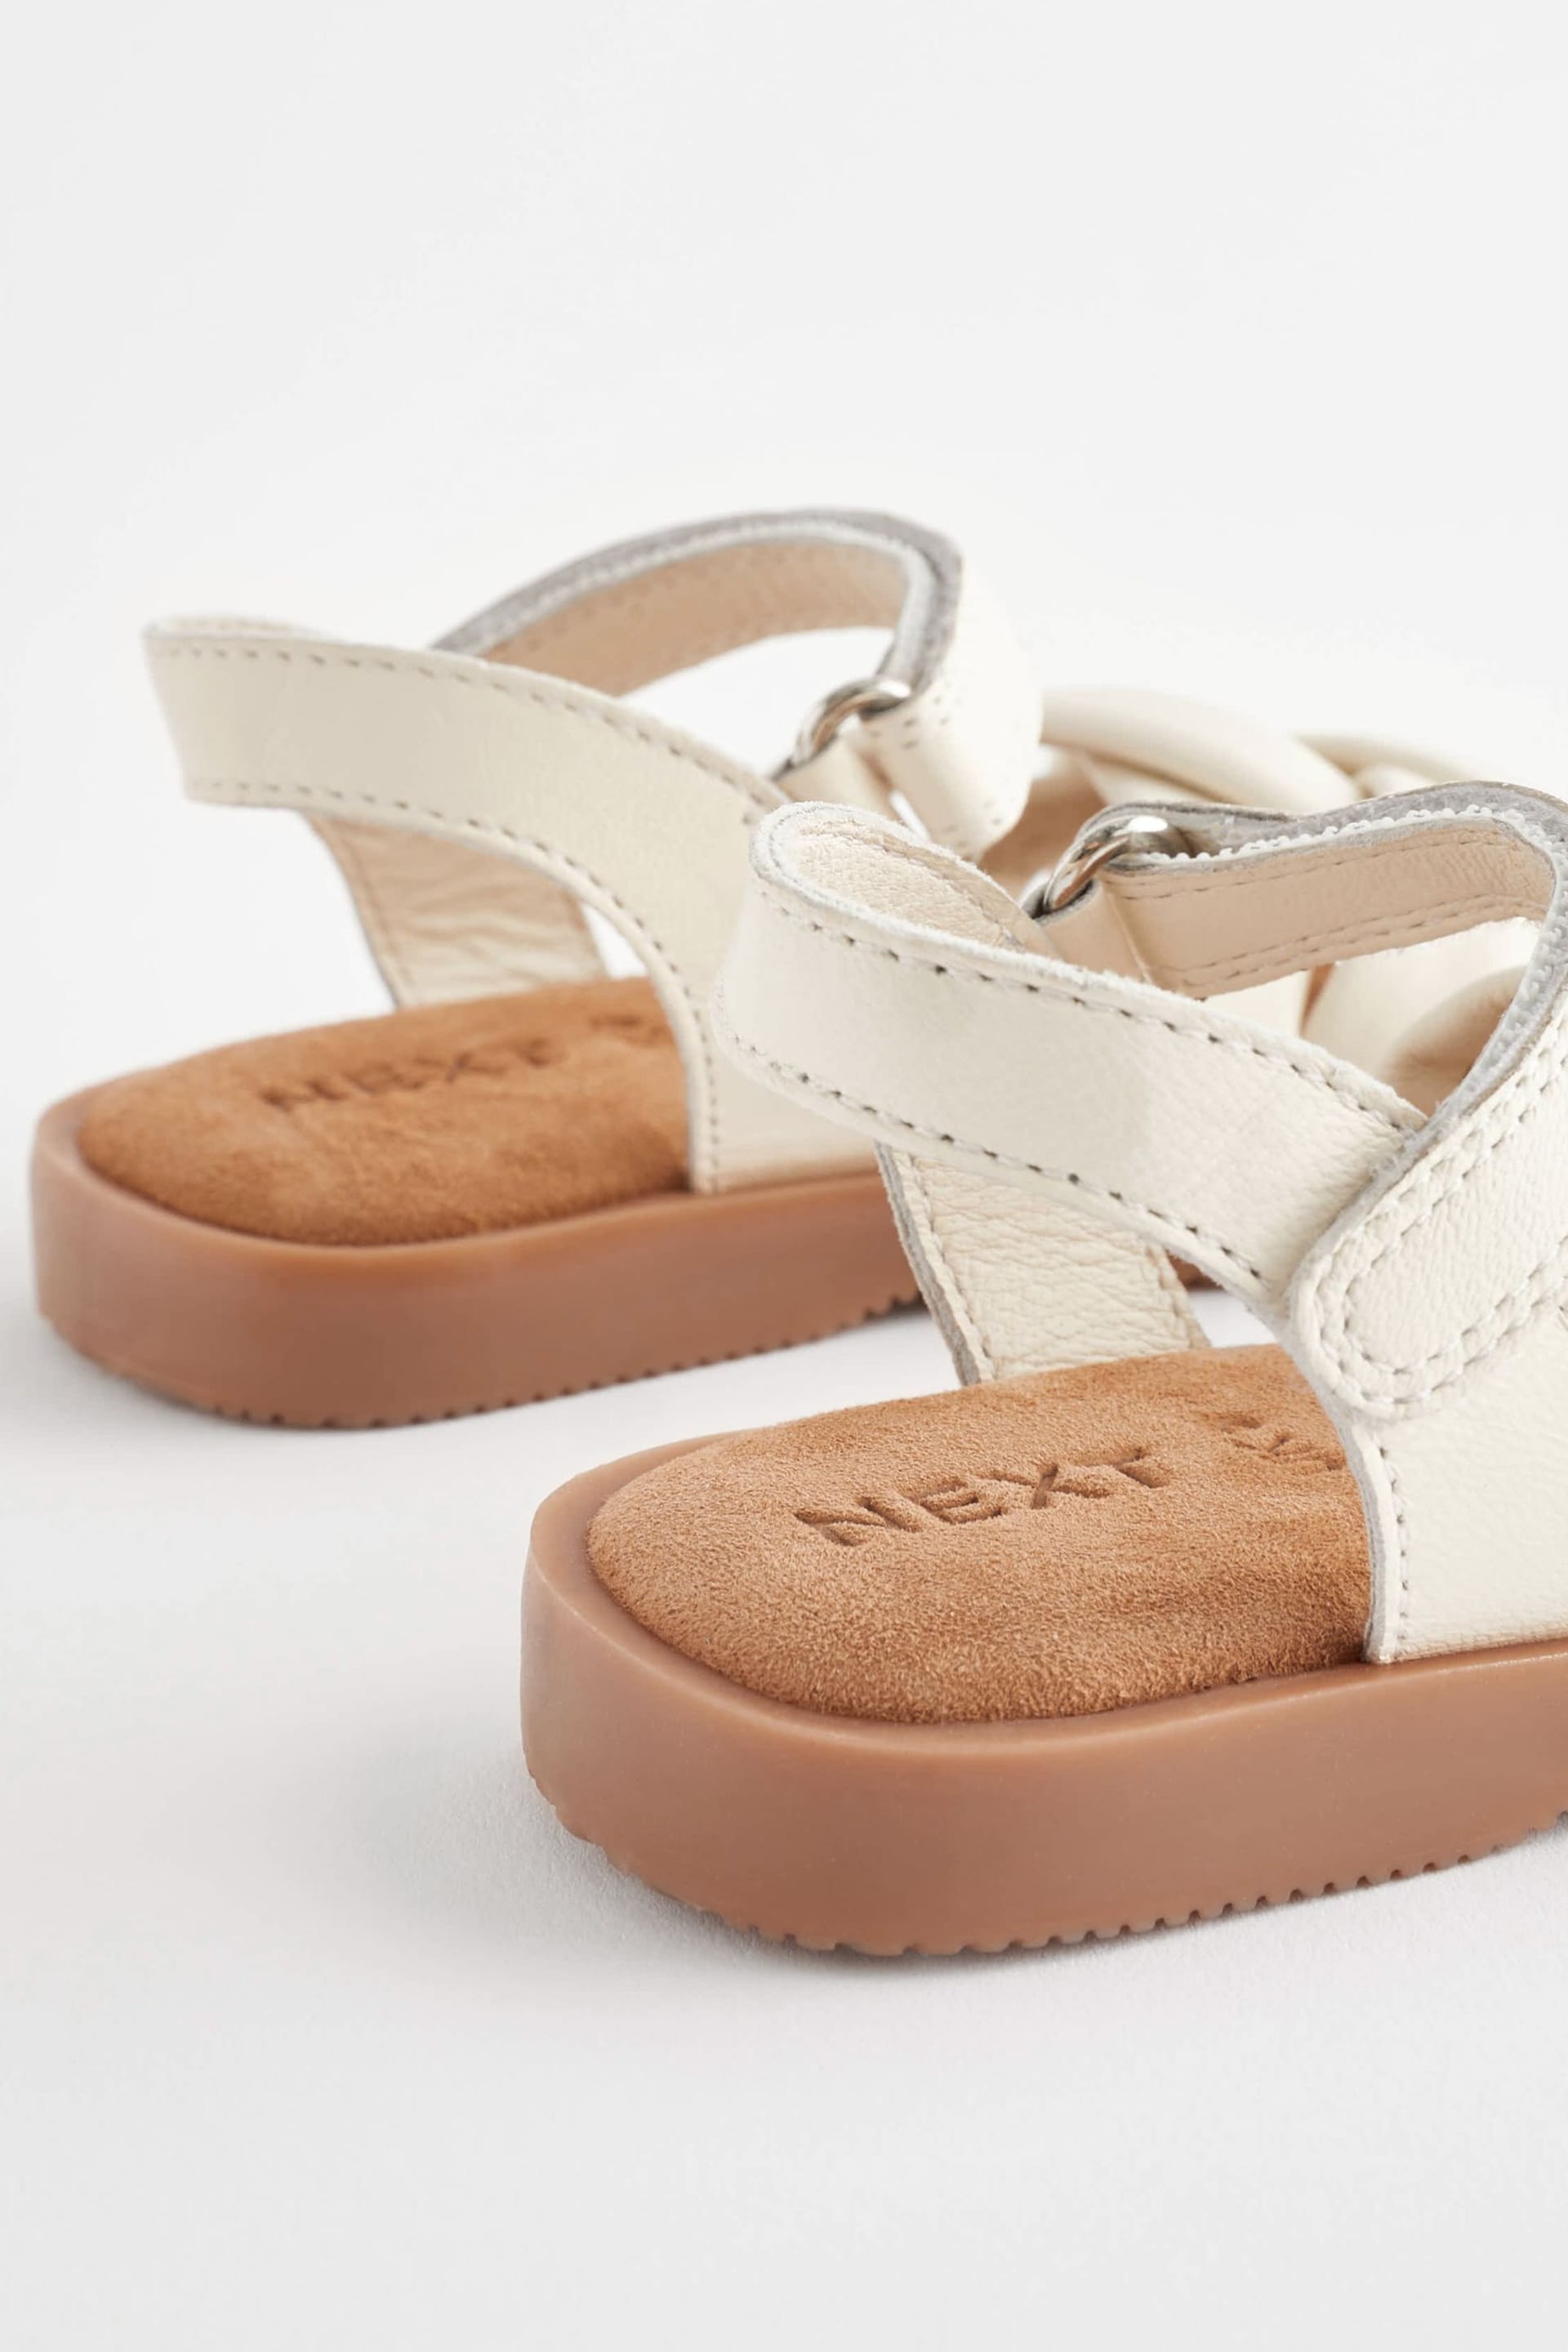 White Leather Woven Sandals - Image 3 of 5